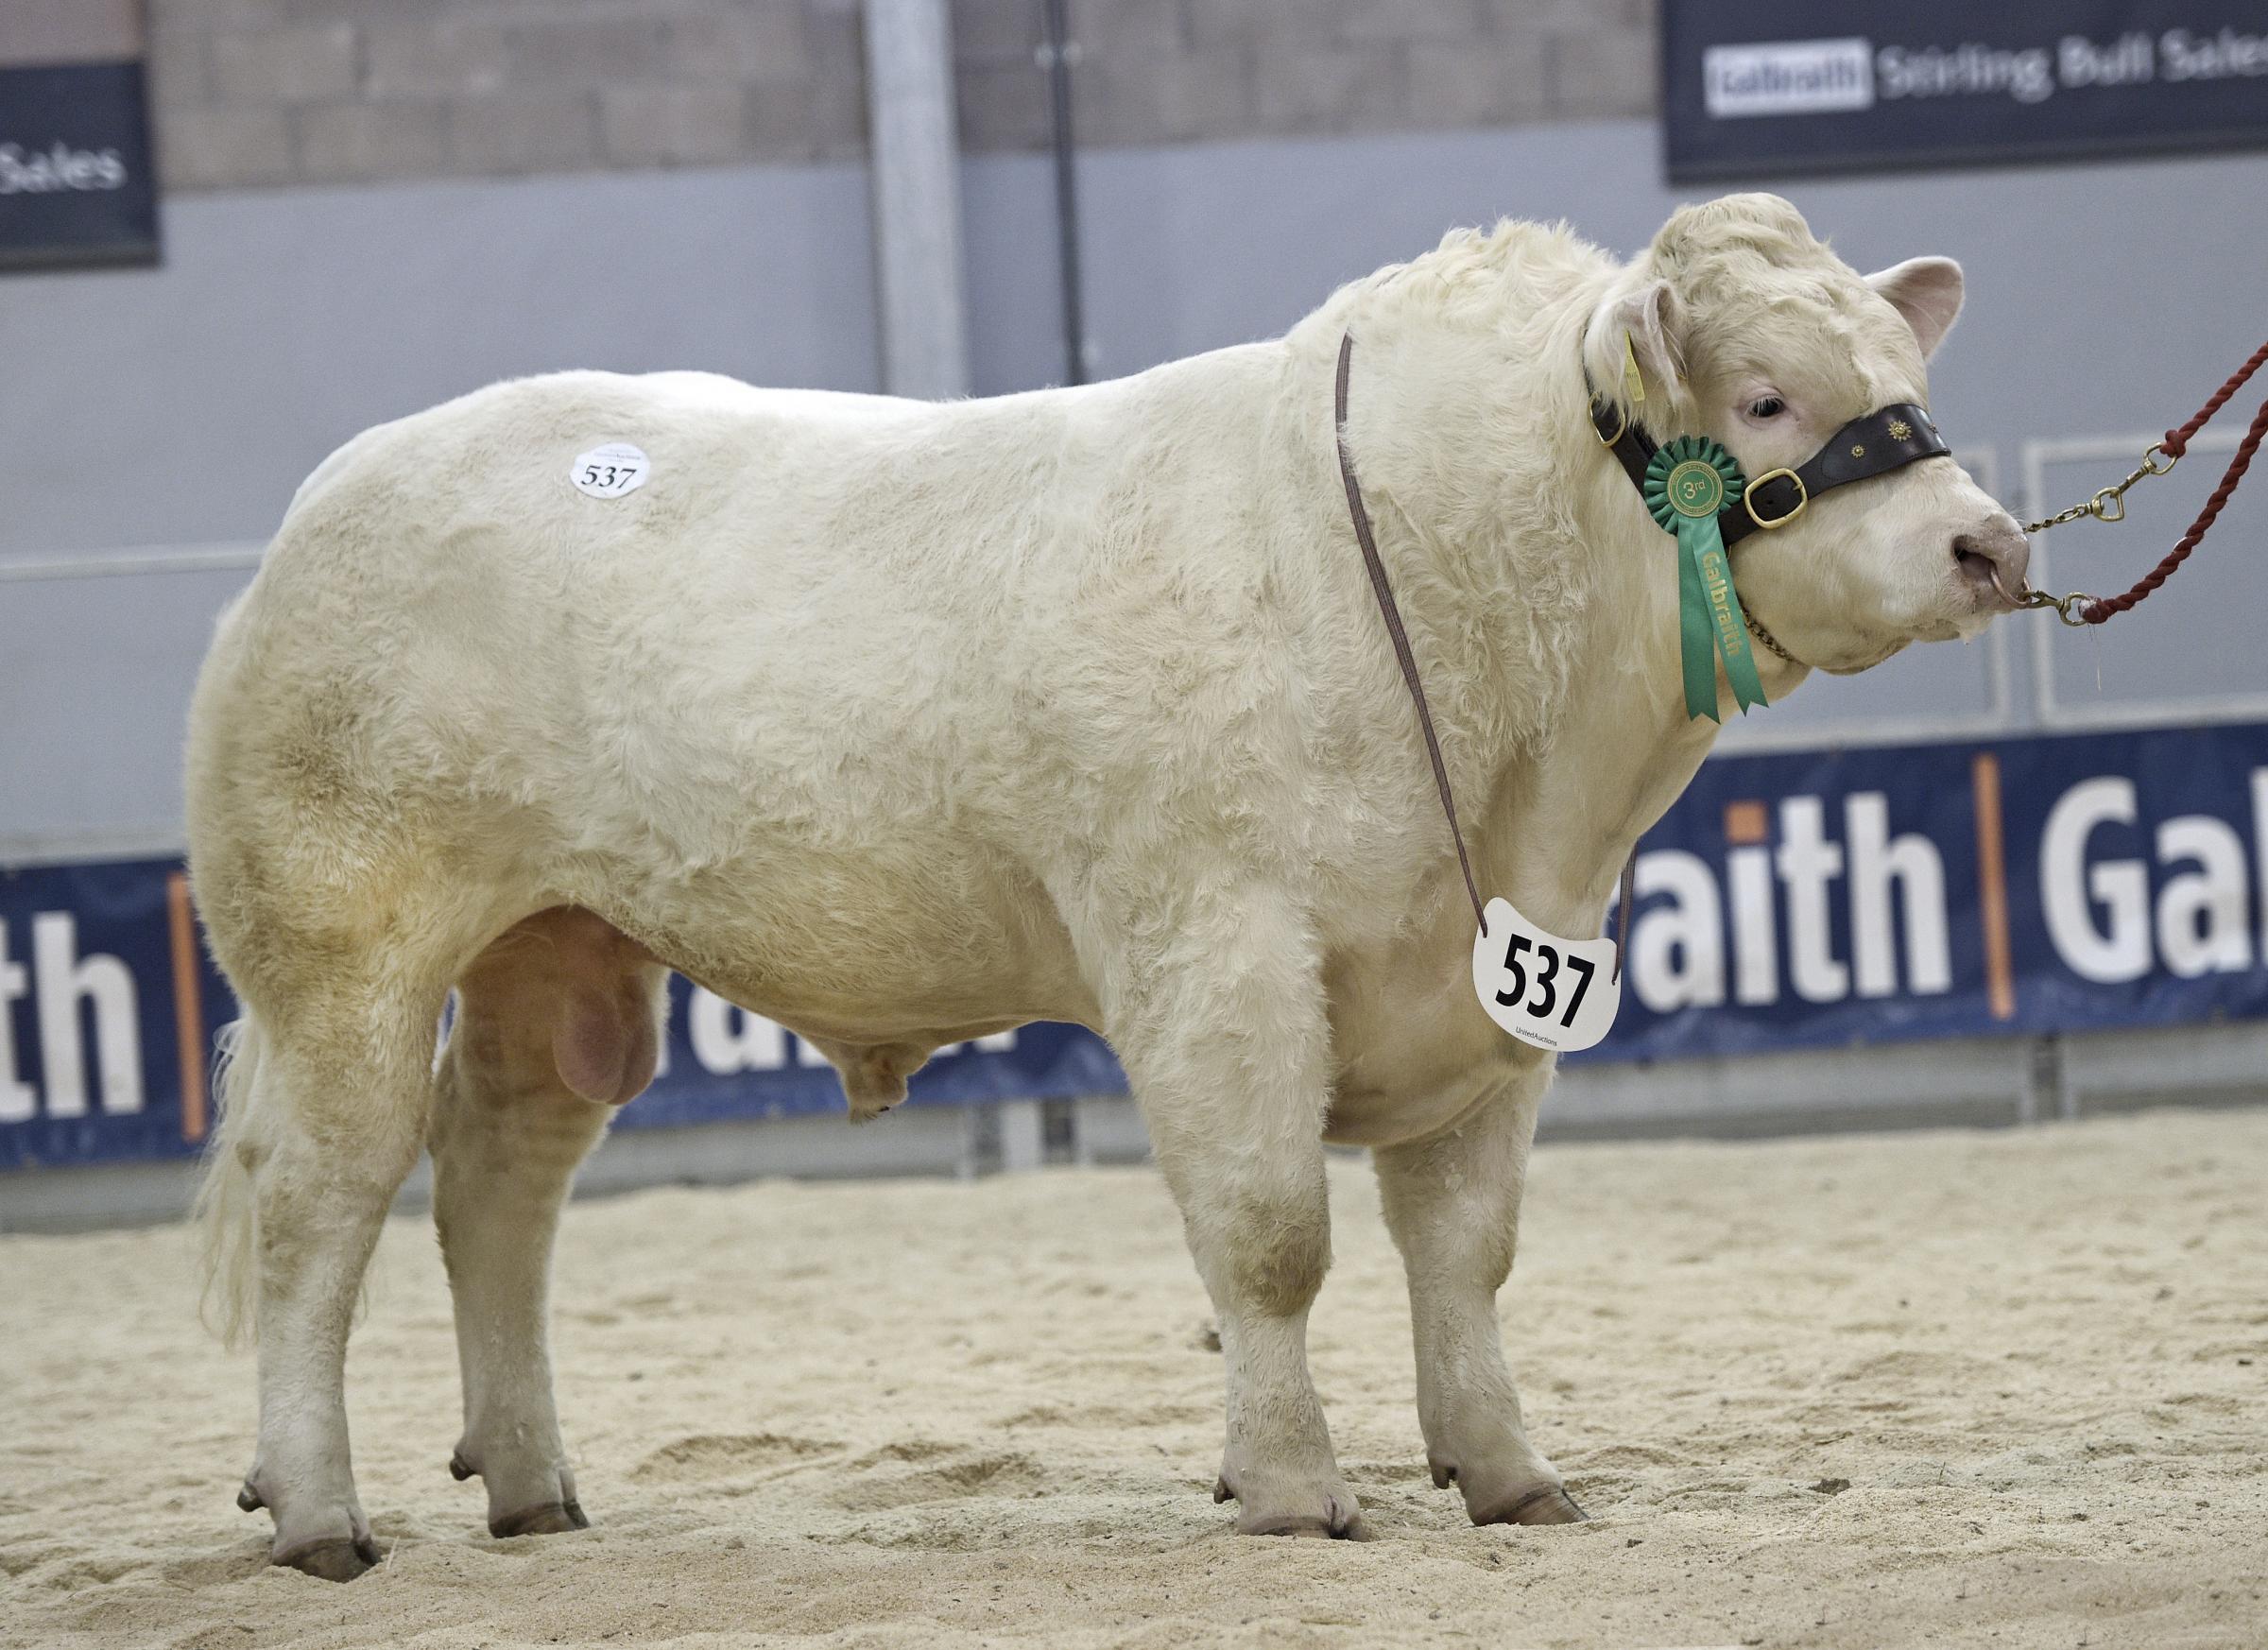 The best from J and S Middleton, Hollywell Taichi, made 10,000gns